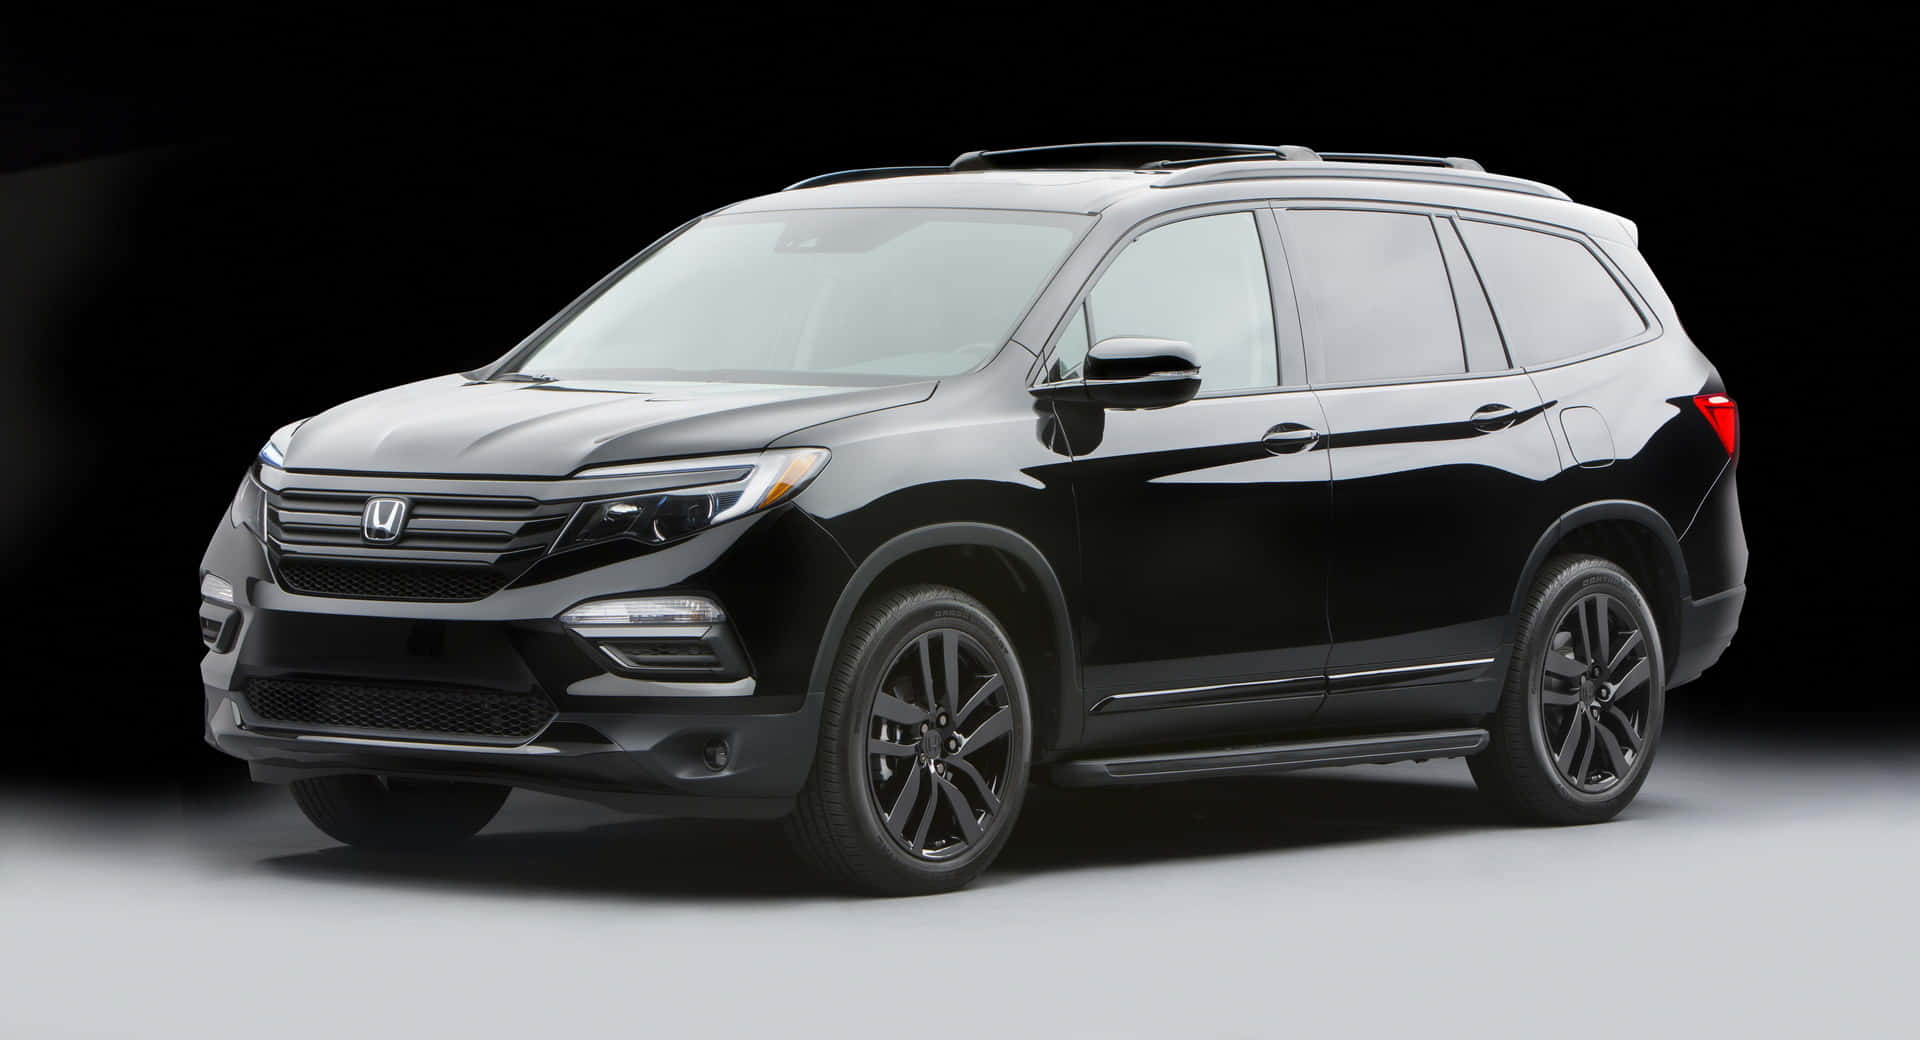 Look no further, the Honda Pilot - the perfect vehicle for all your needs!